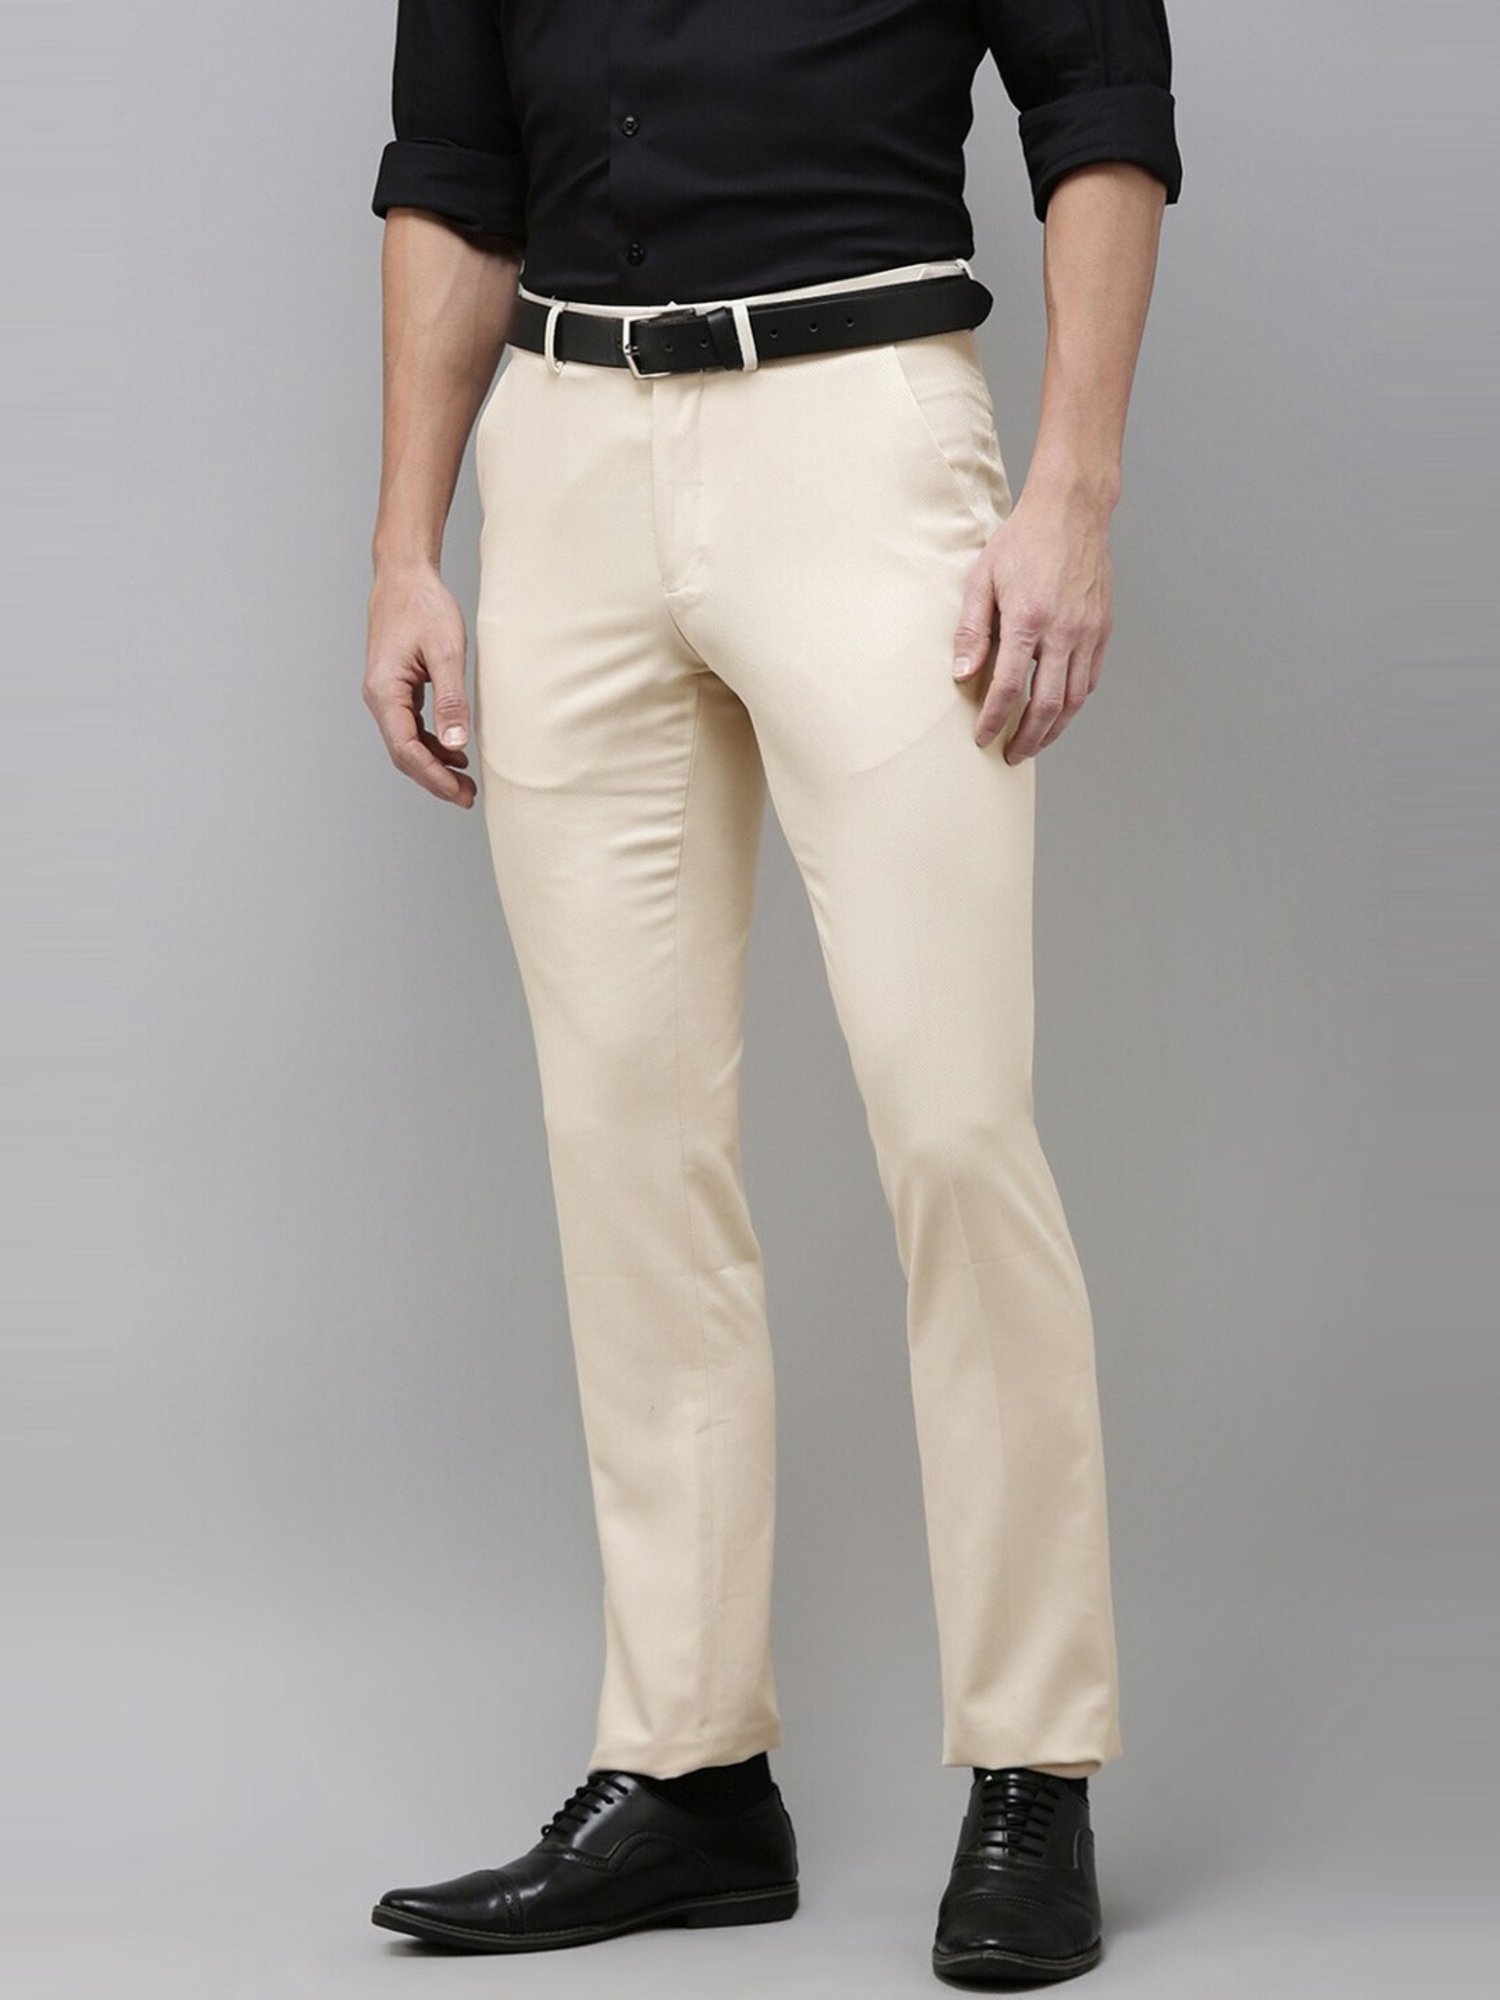 Buy Regular Fit Men Trousers White Beige and Green Combo of 3 Polyester  Blend for Best Price Reviews Free Shipping